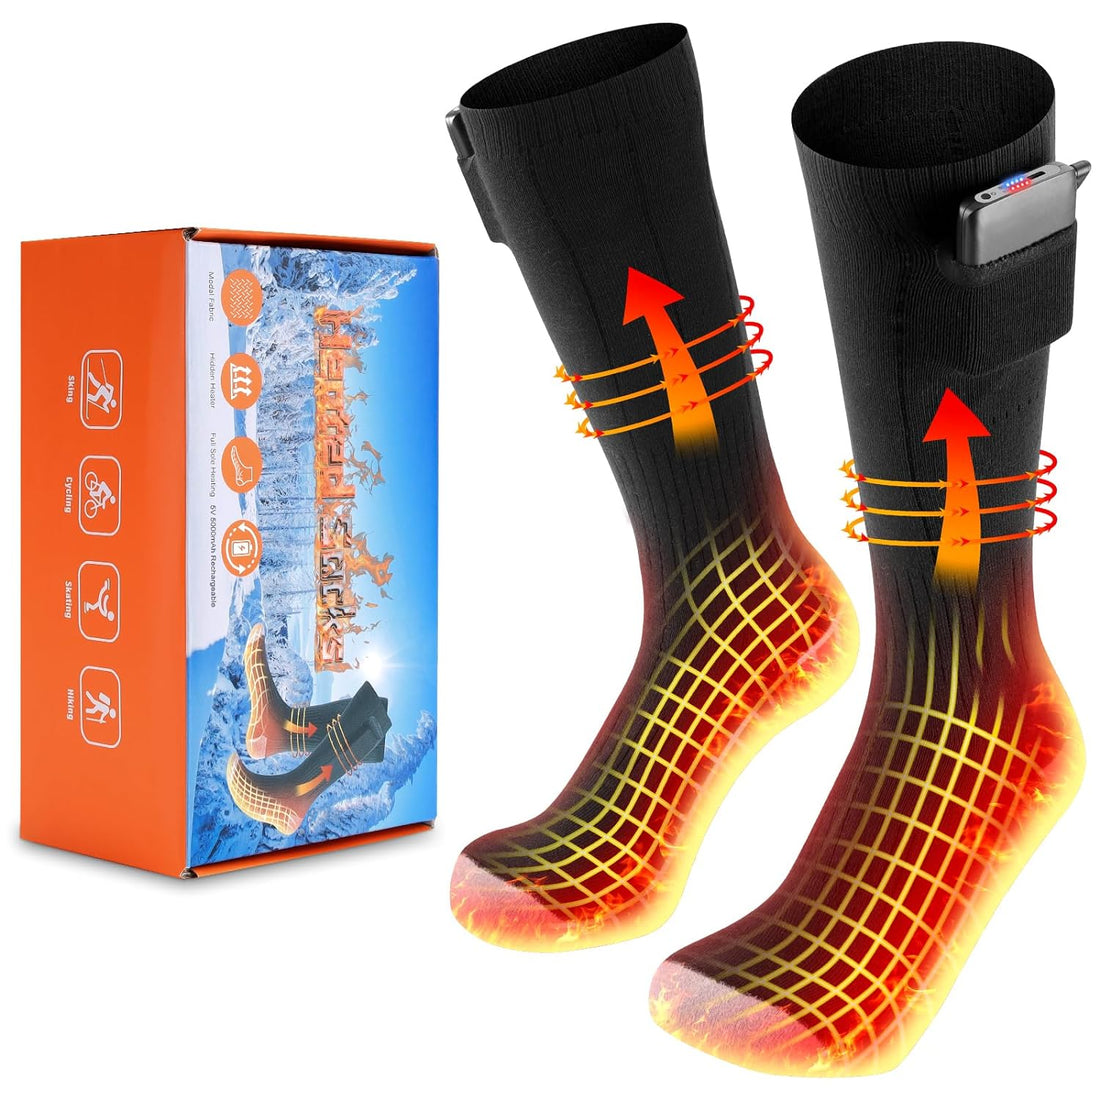 YELUFT Electric Heated Socks Rechargeable Battery - Rechargeable 5V 5000mah Battery Heated Socks for Men and Women, Full Sole Heating Electric Socks for Cycling, Skiing, Skating, Hiking(L Size)